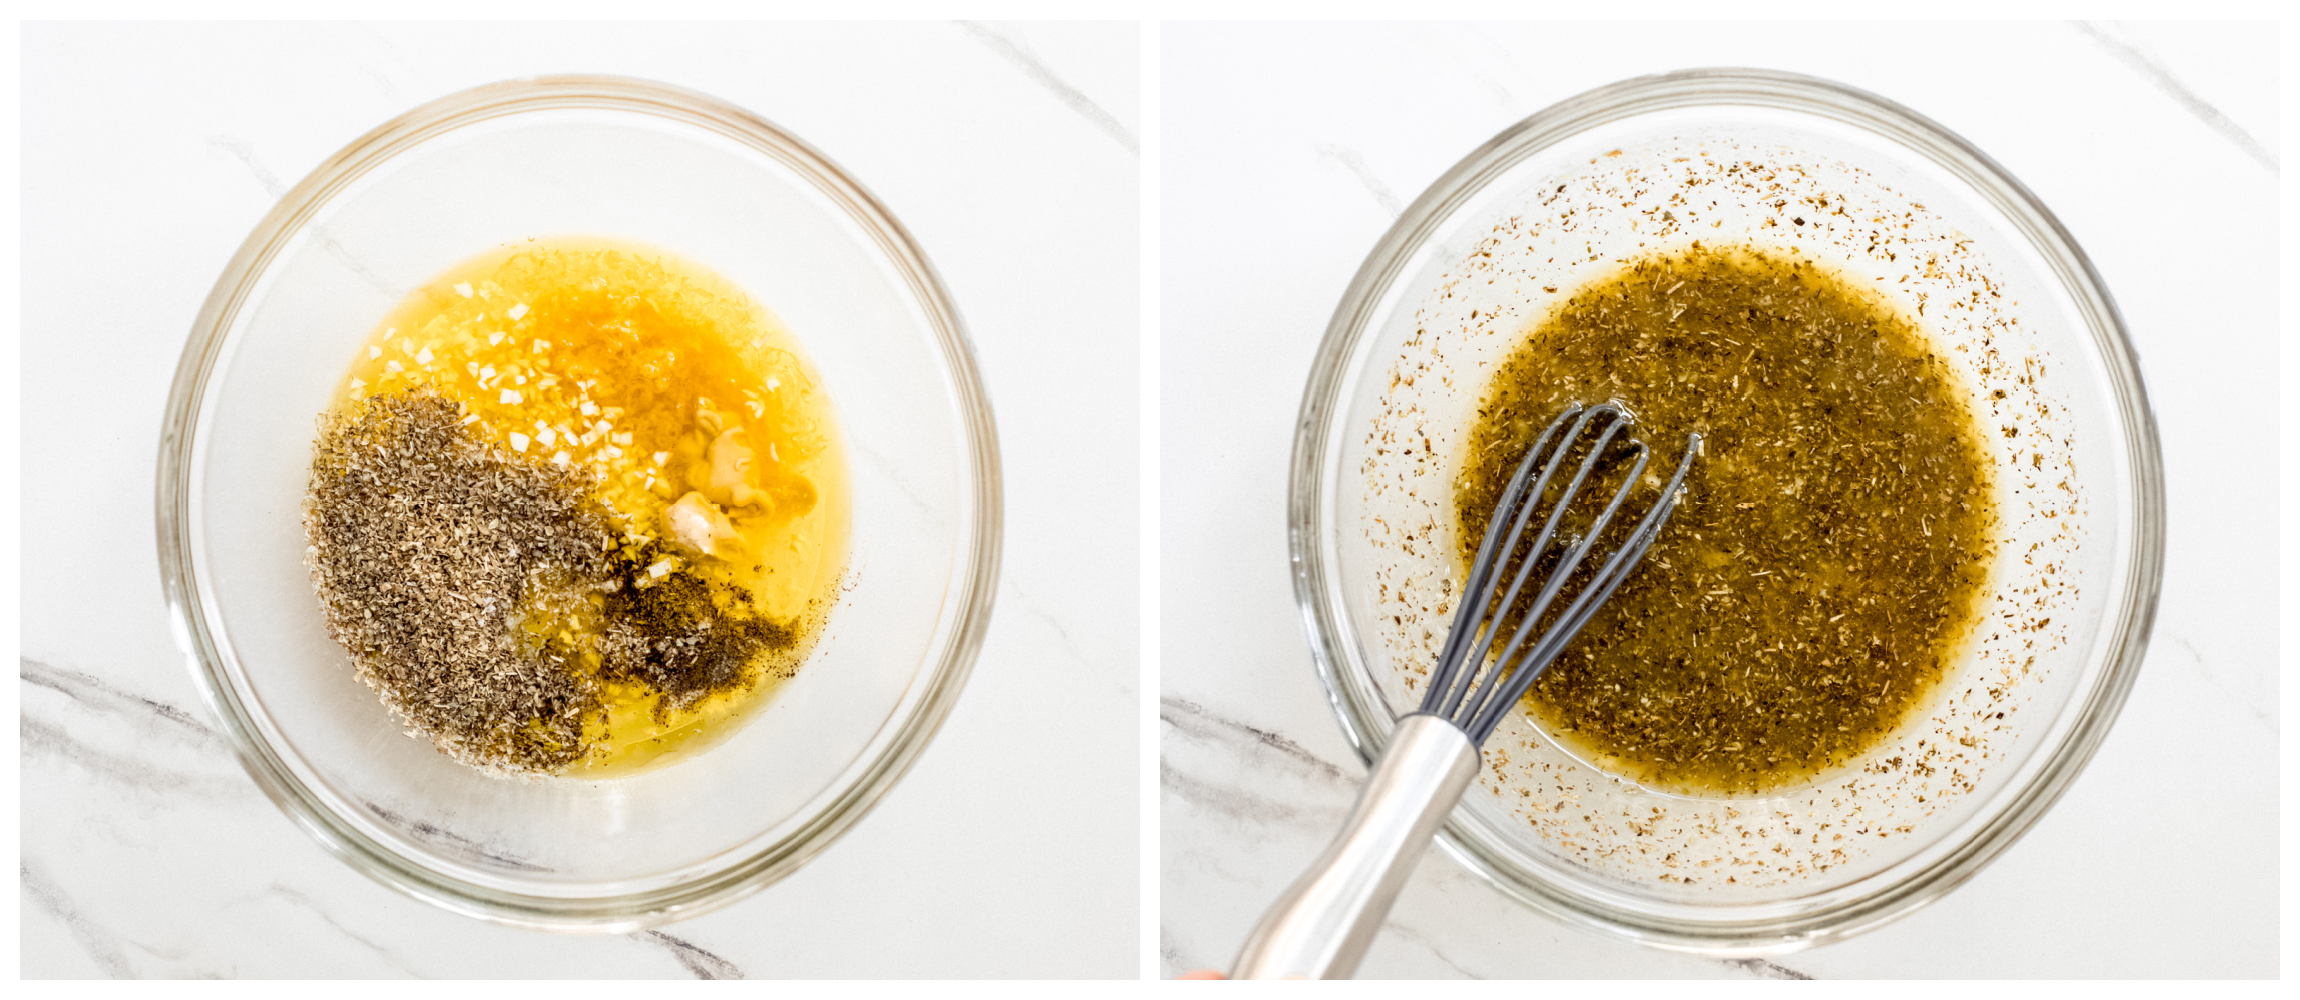 two glass bowl photos showing ingredients for marinade in one, and whisked ingredients in second.